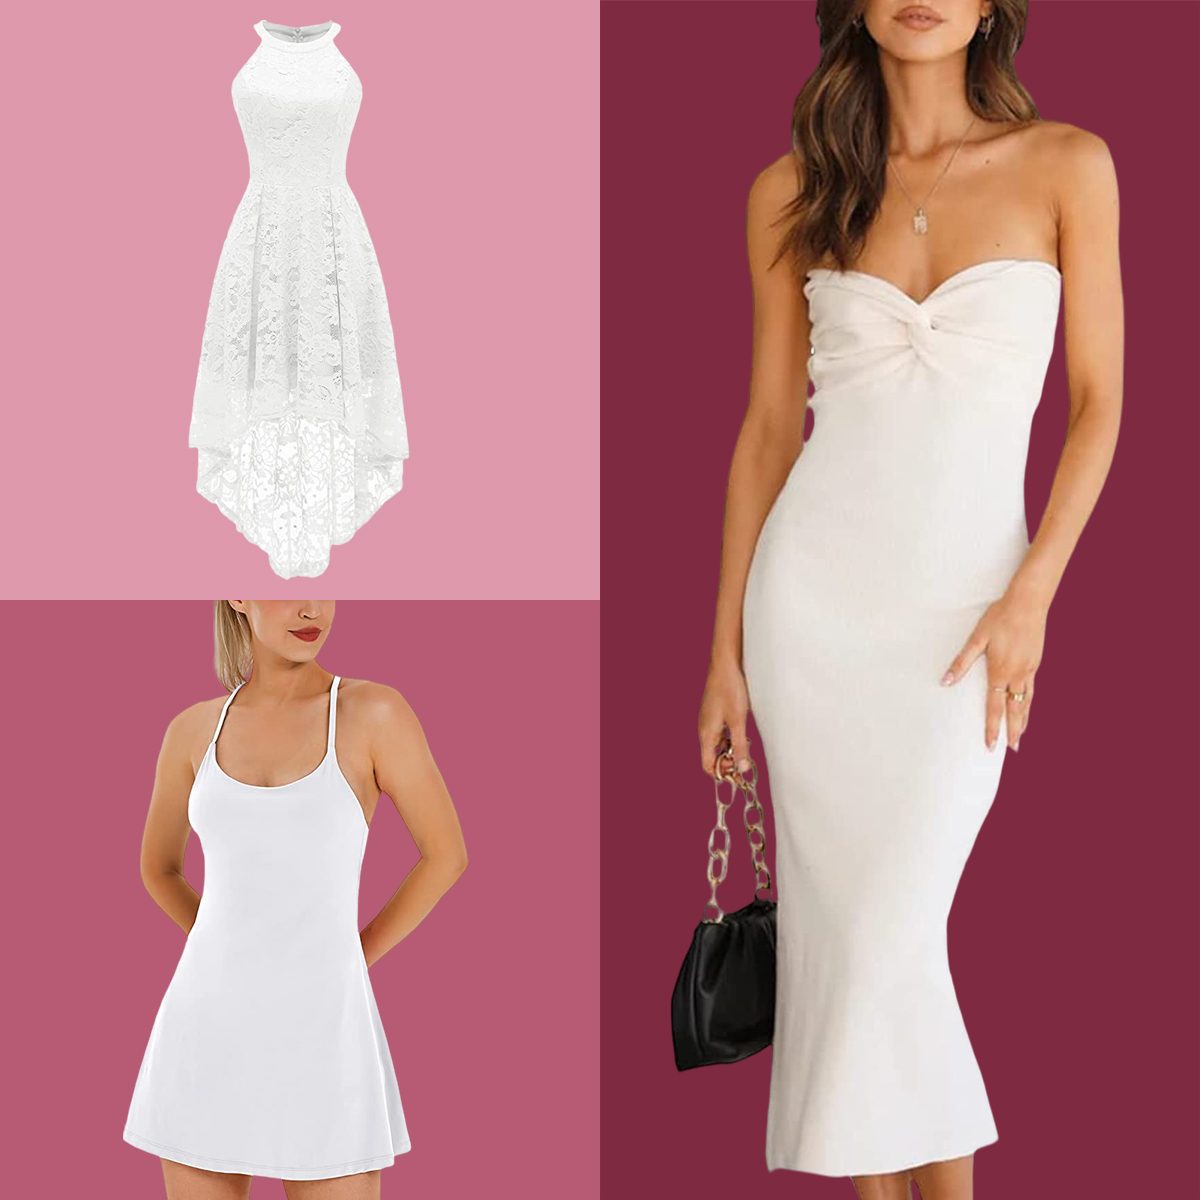 The perfect dress for the summer is our BAWDYCON dress that has